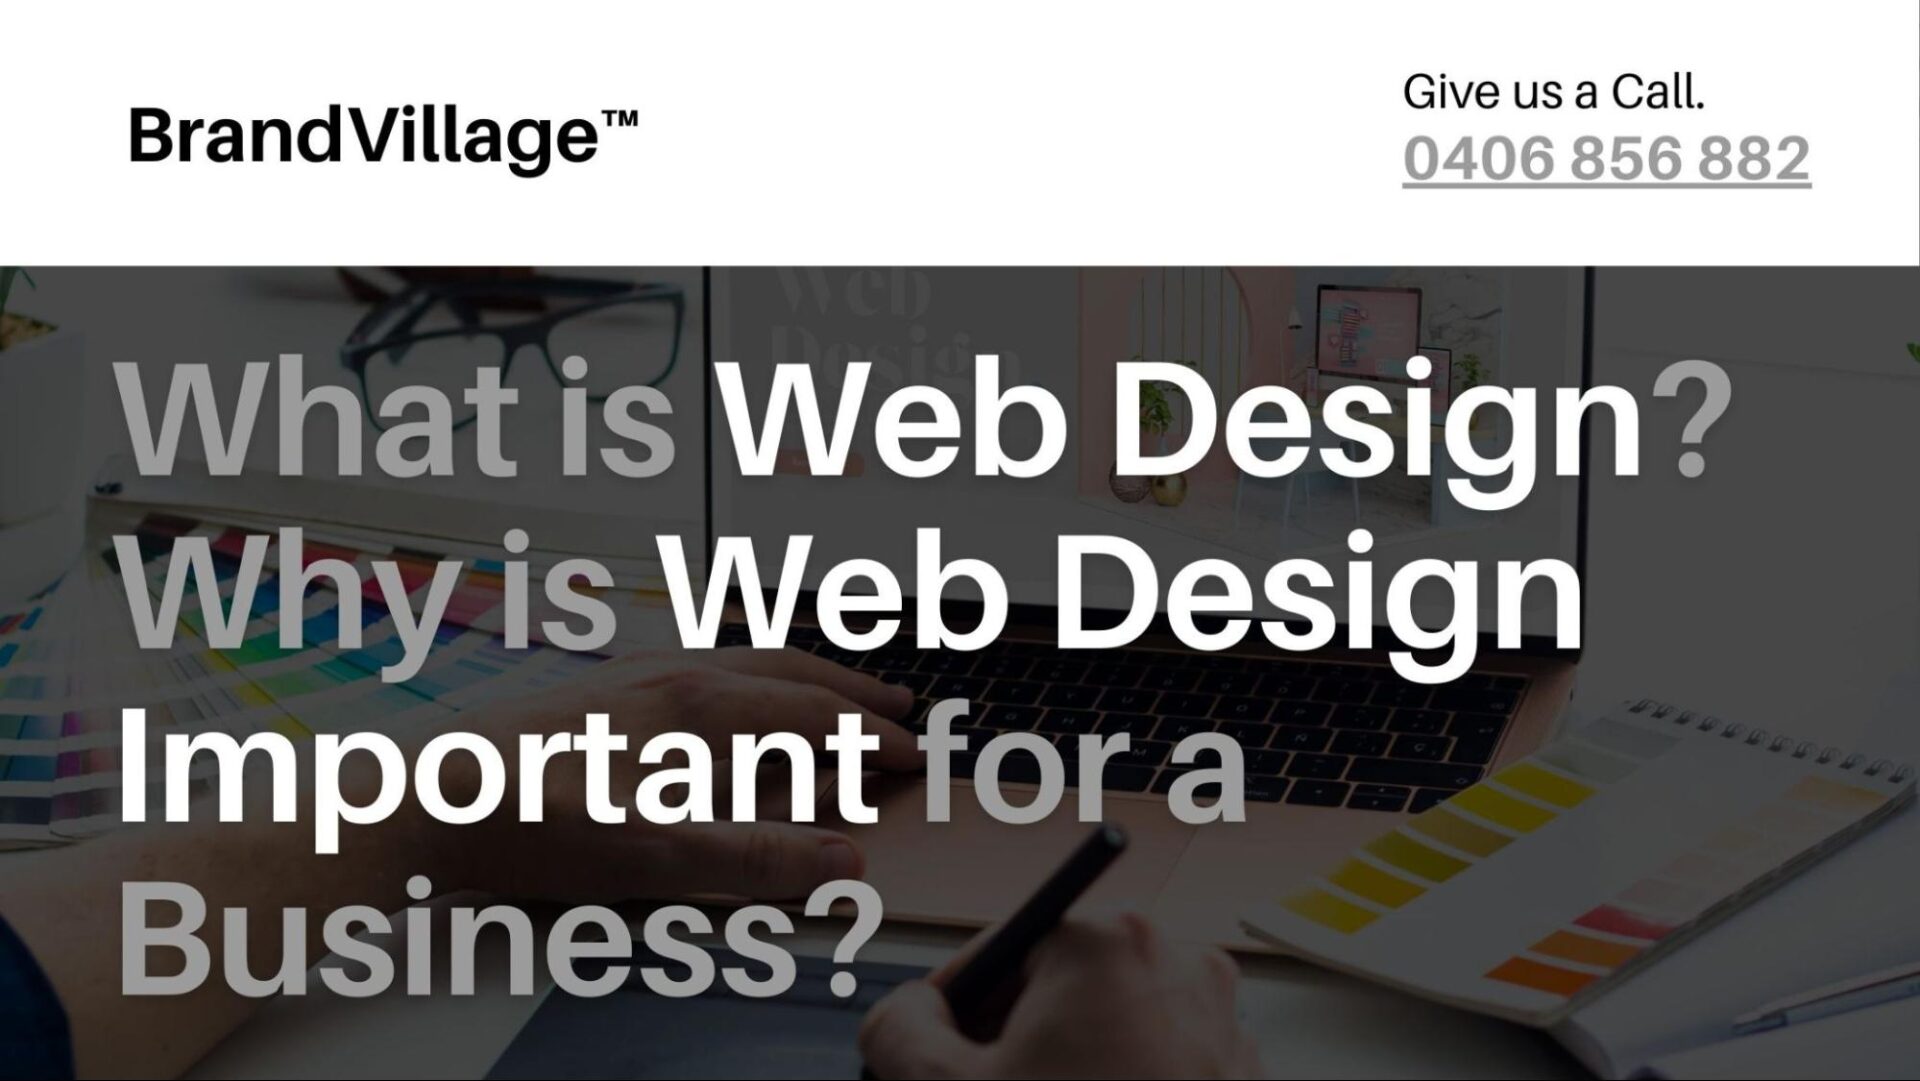 What is Web Design? Why is Web Design Important for a Business?